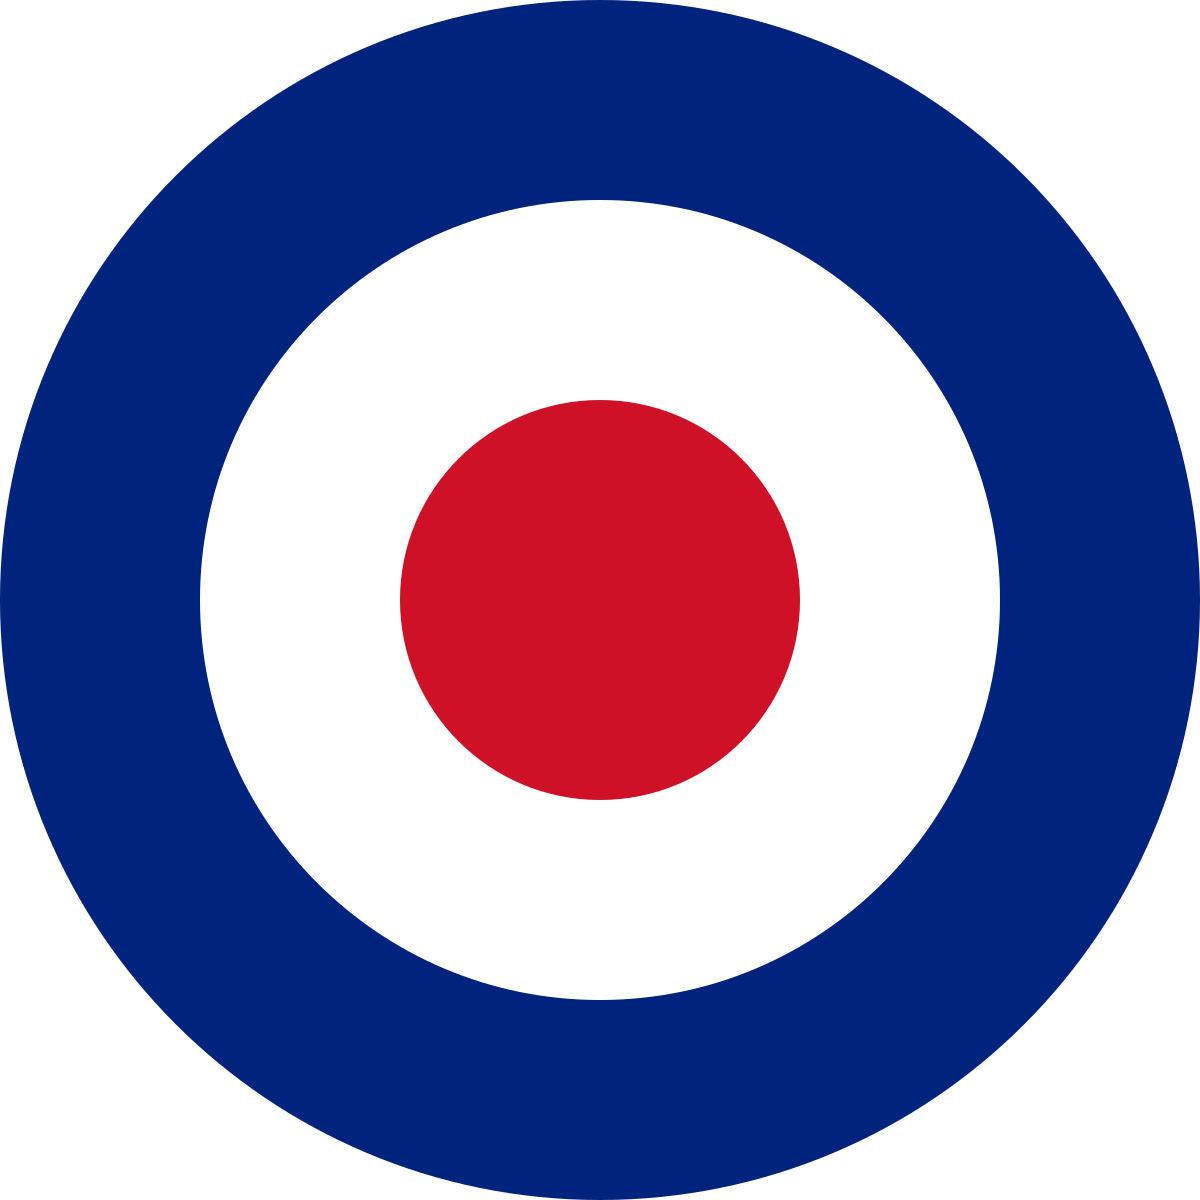 Royal air force roundels. Clipart explosion ww1 bomb